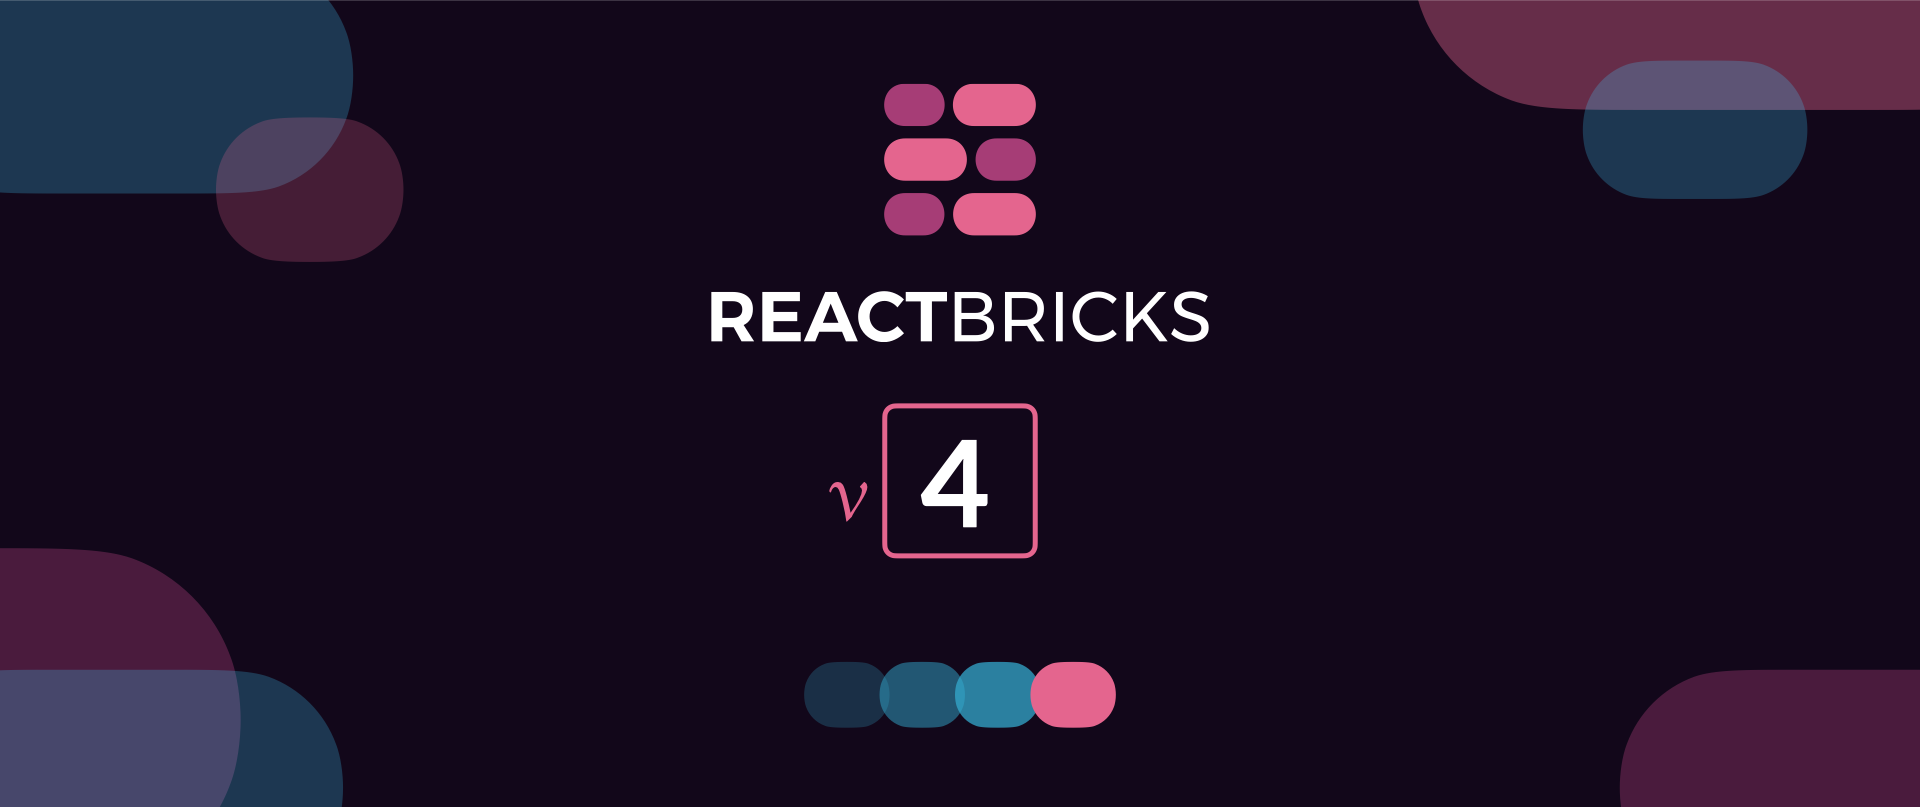 Announcement of the release of React Bricks V4